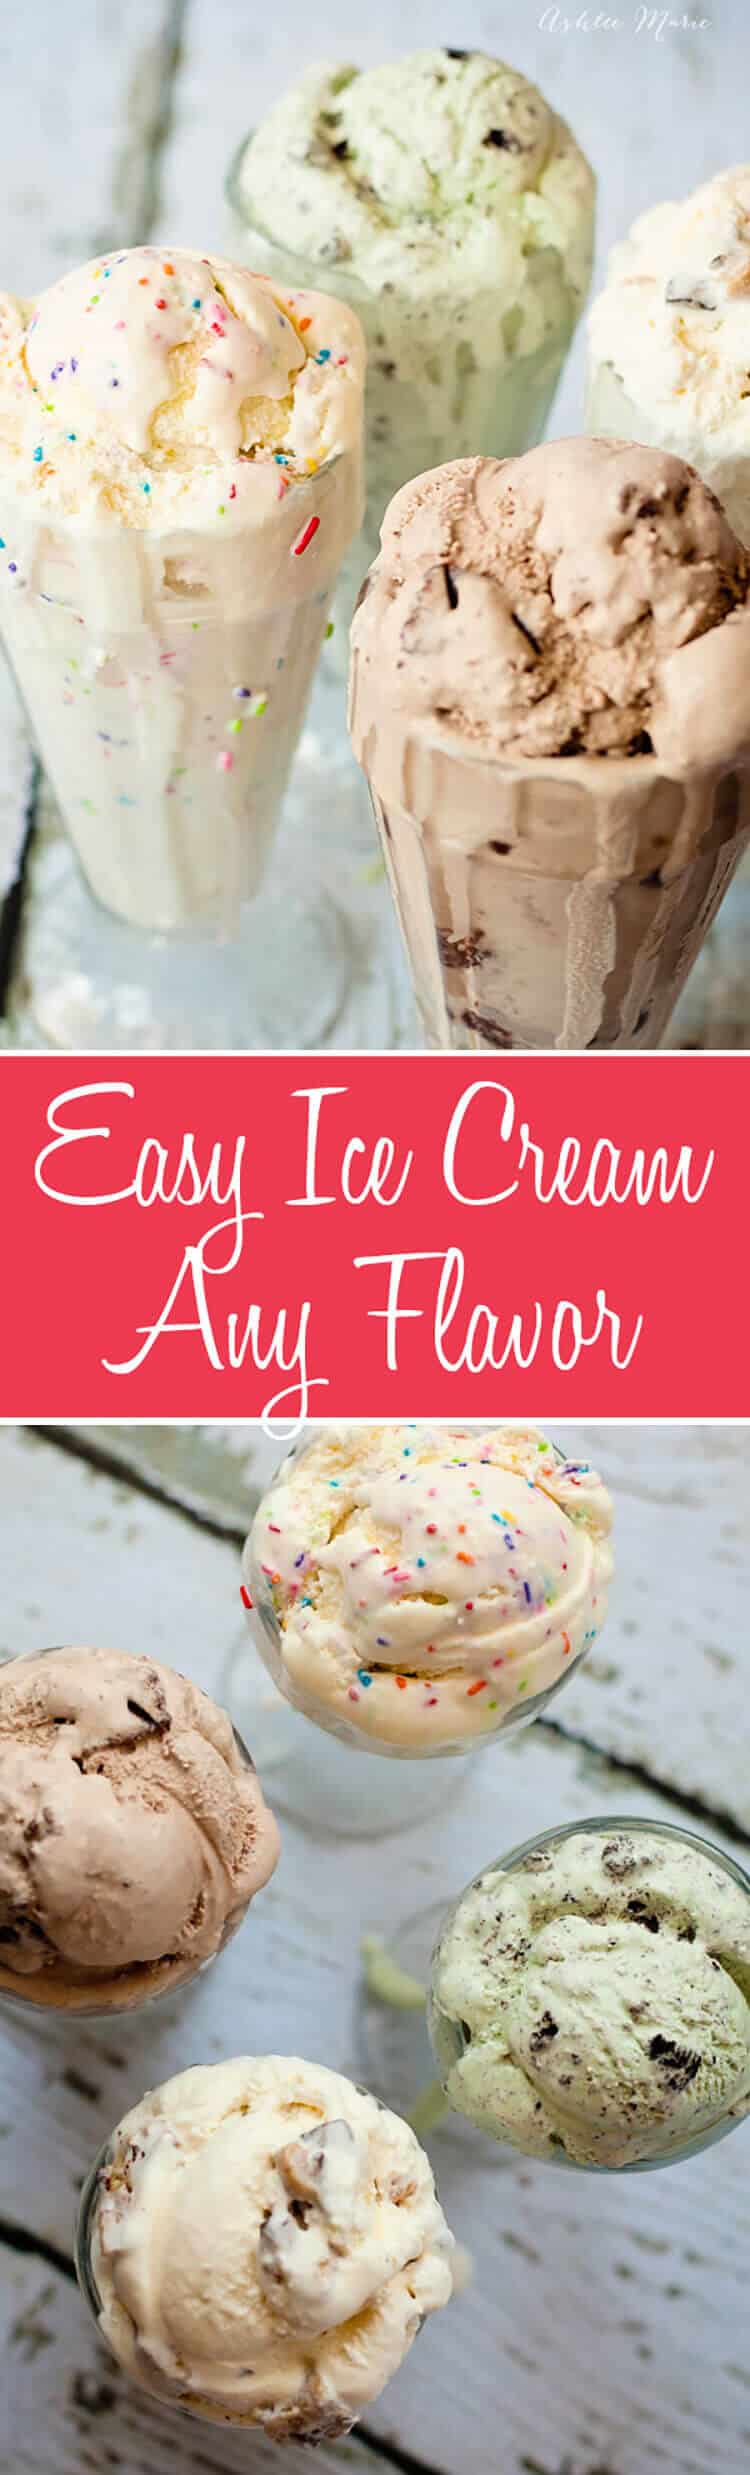 the most basic and easy ice cream recipe, no custard base and easy to turn into ANY flavor with extracts, mix ins and sauces.